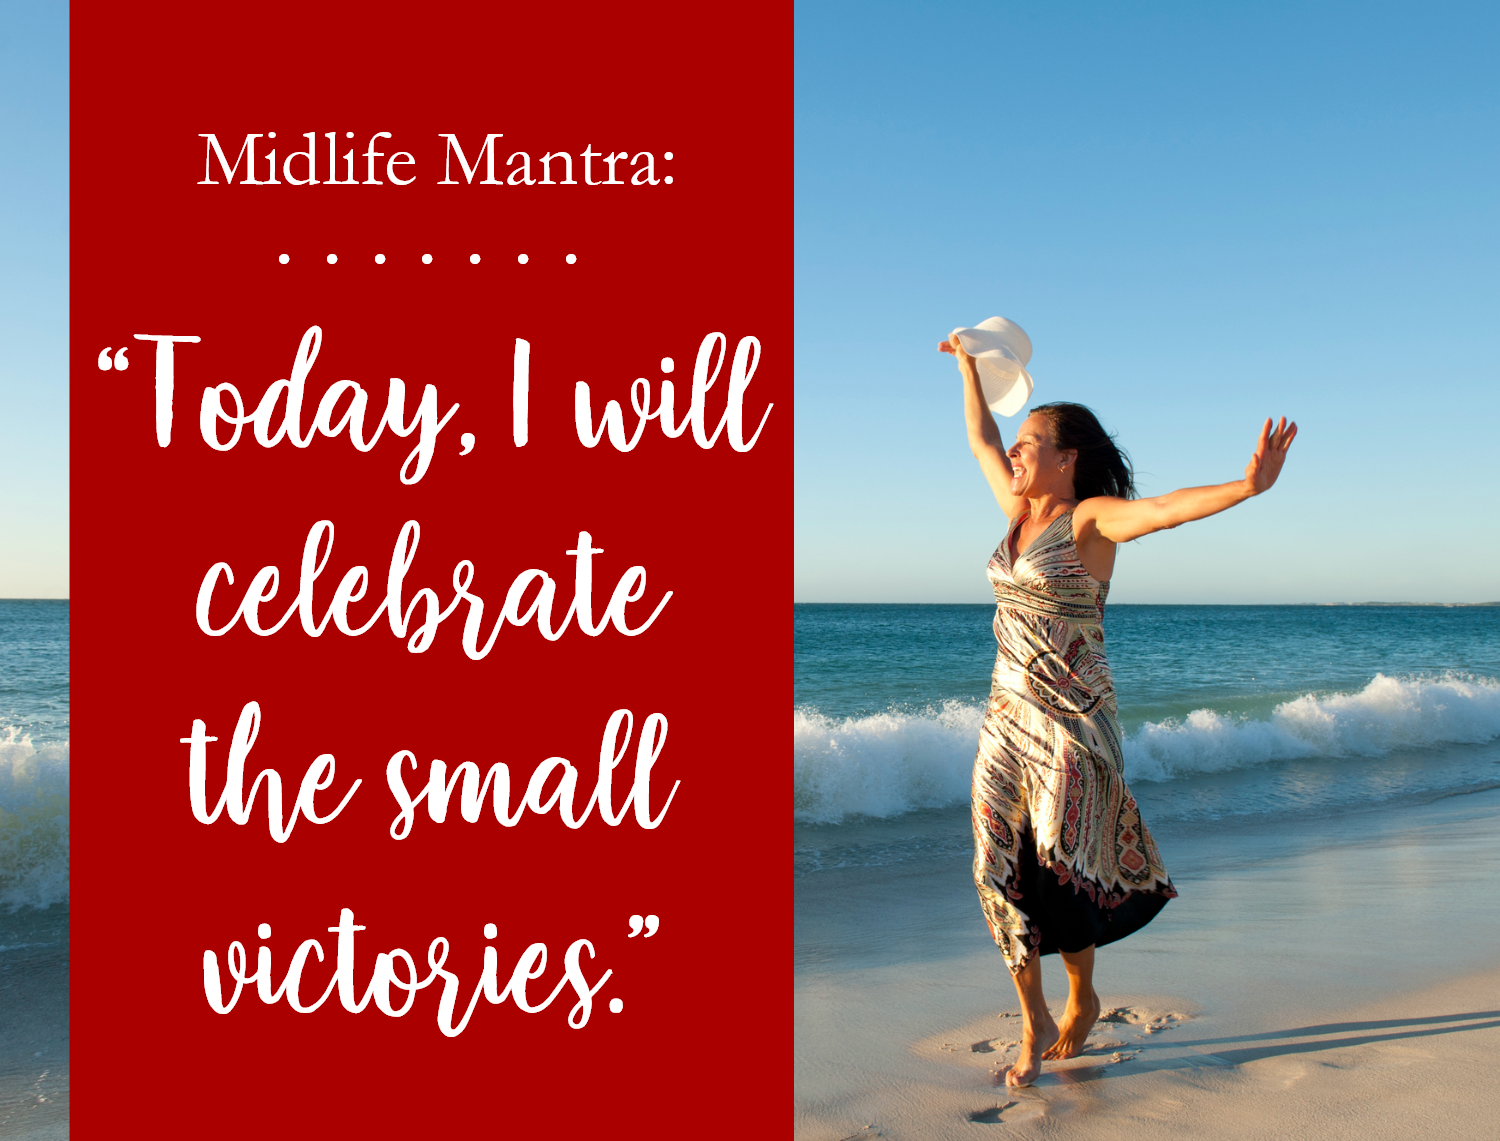 MIDLIFE MANTRA: Today I Will Celebrate the Small Victories